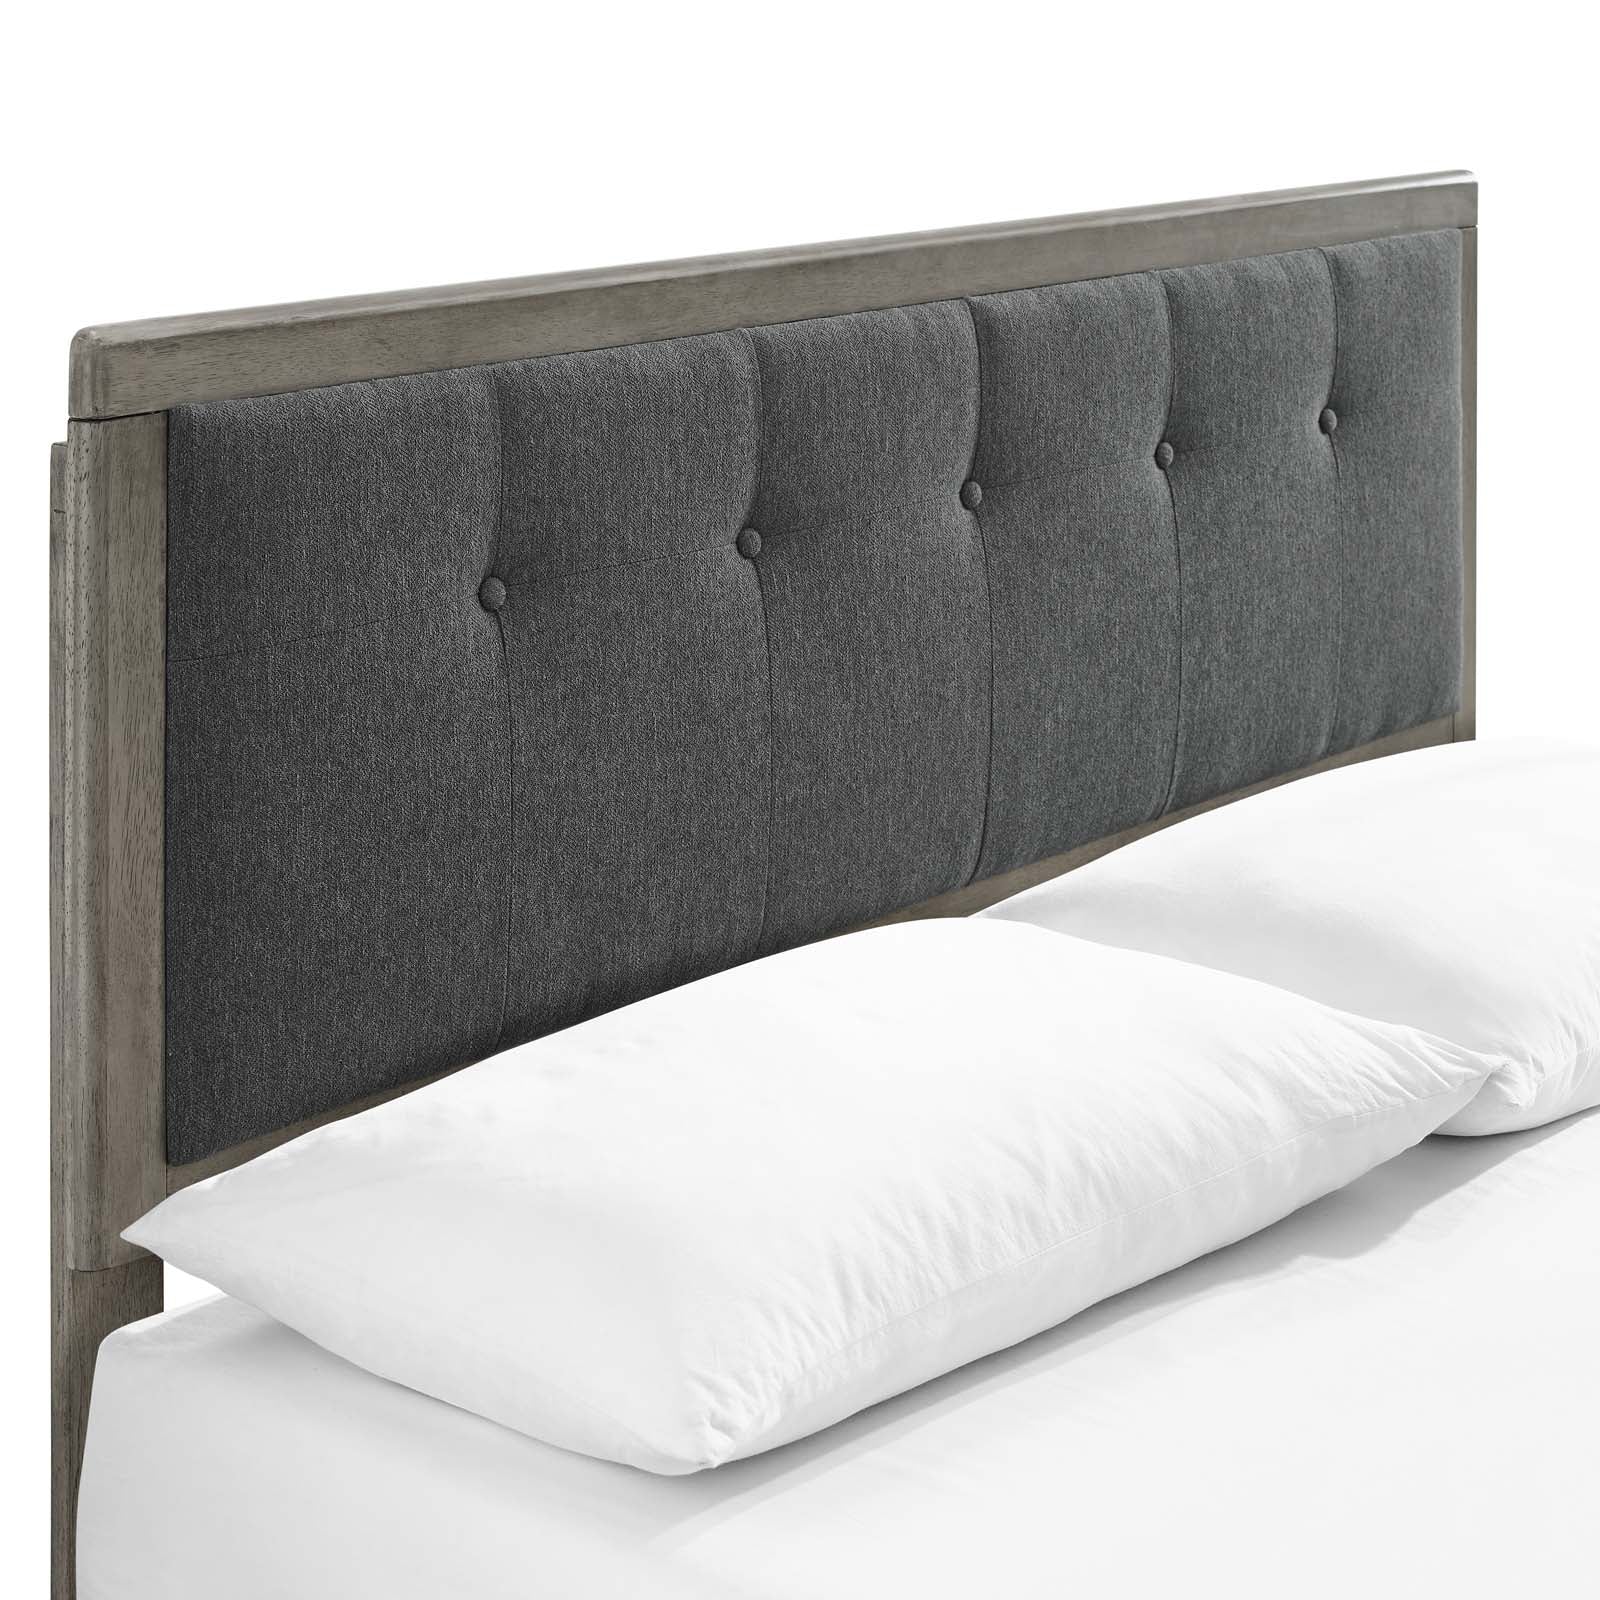 Modway Beds - Willow Queen Wood Platform Bed With Splayed Legs Gray Charcoal